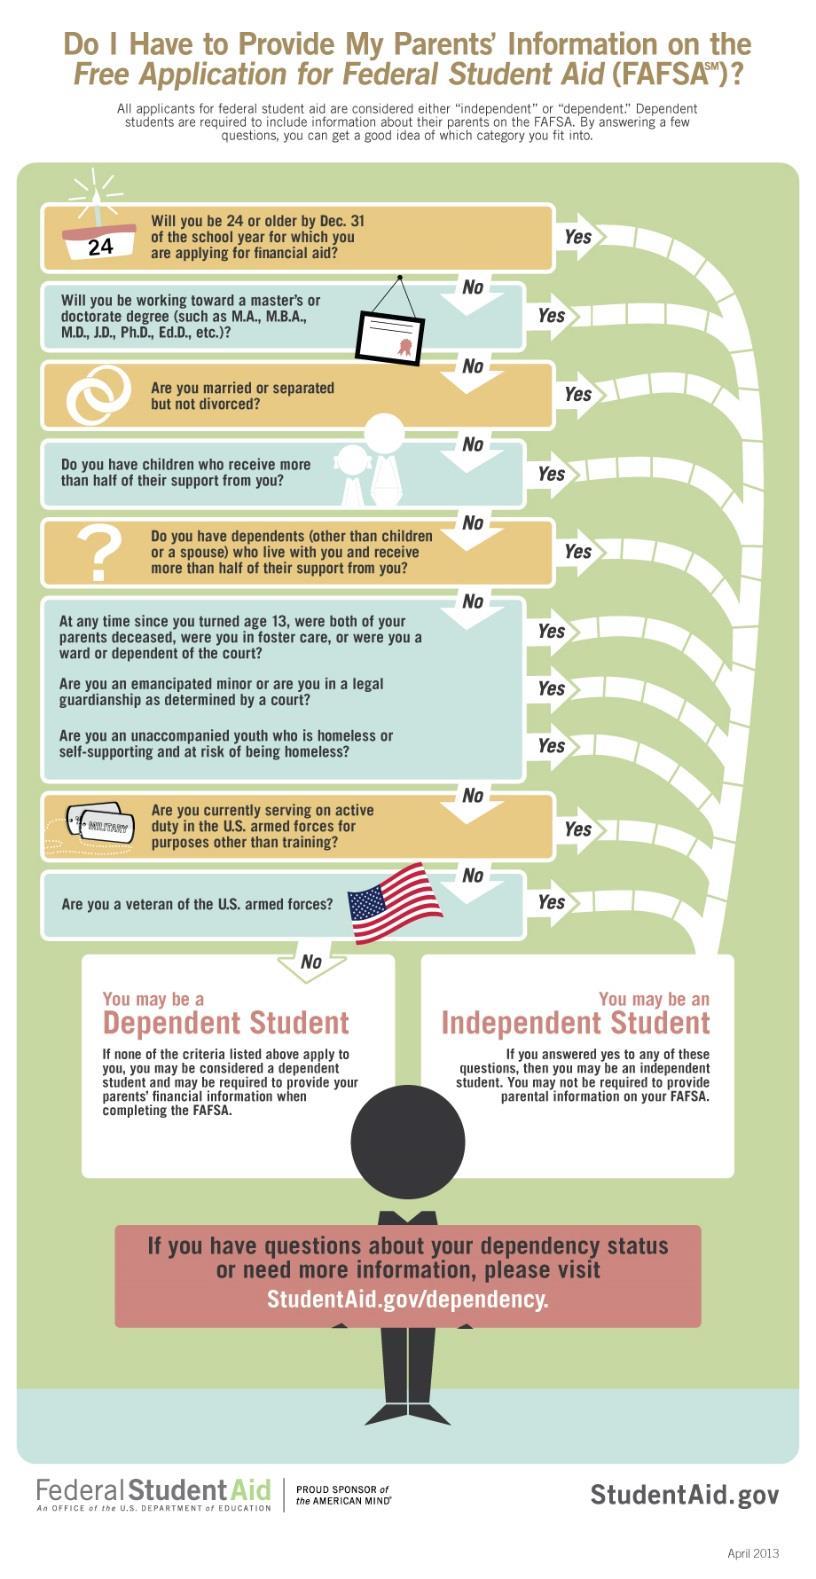 Dependent vs. Independent Dependent student must include all parent information on their FAFSA.